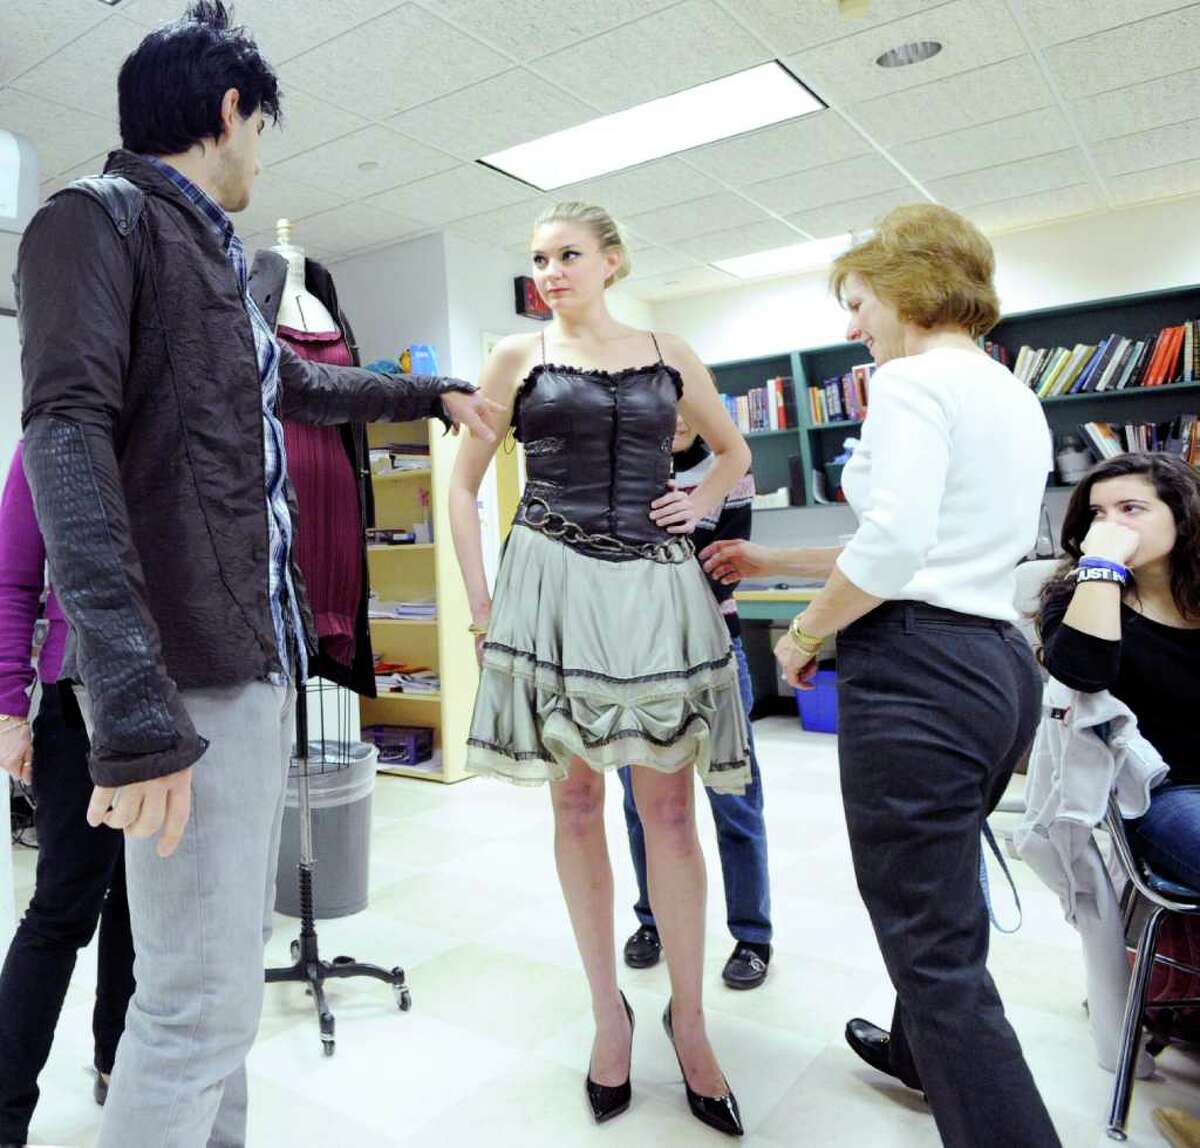 Greenwich fashion designer Jason Troisi, left, who was on the last season of the popular reality show “Project Runway,” shows off one of his dresses on model Anna McGhee as Greenwich High School teacher, Sherry Myer, right, inspects the design during a visit by Troisi to a Greenwich High School fashion design class, Friday morning, Dec. 17, 2010.